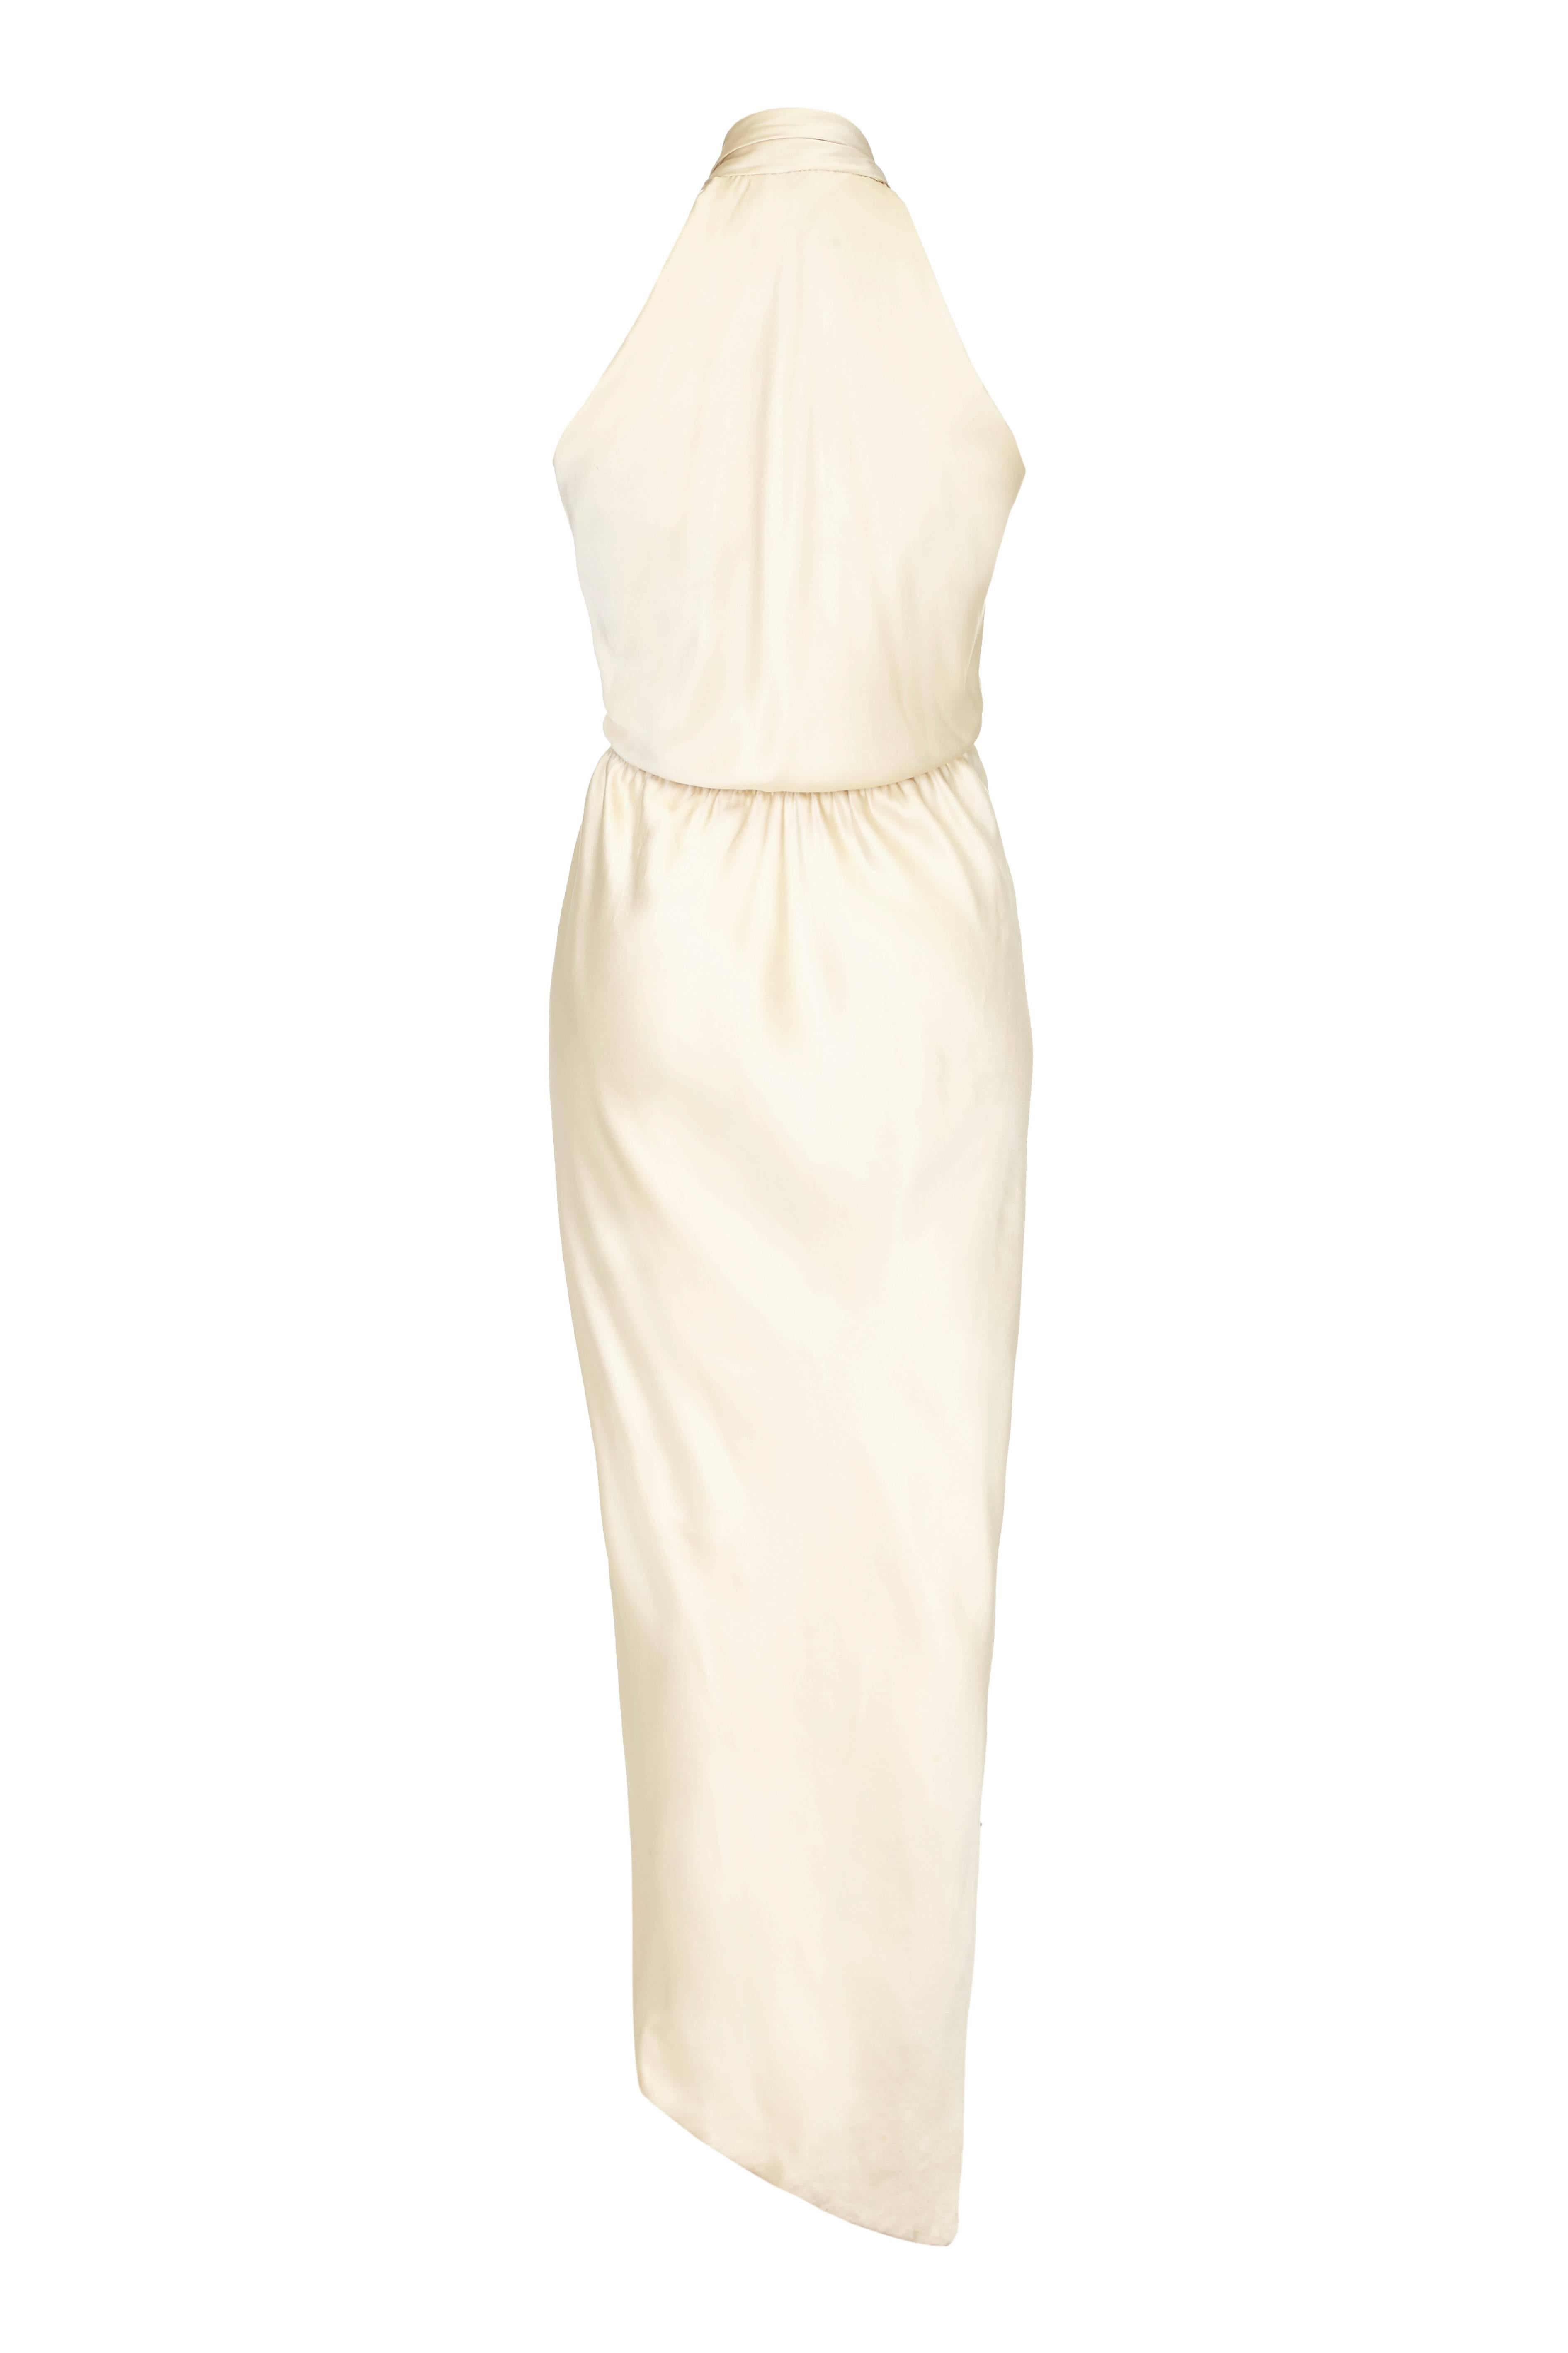 Incredible vintage 1970s Halston dress in soft flowing cream silk with asymmetrical wrap skit, cross over front and halter neck with bow detail.  This iconic piece would make a gorgeous option for a non traditional wedding dress or for any other